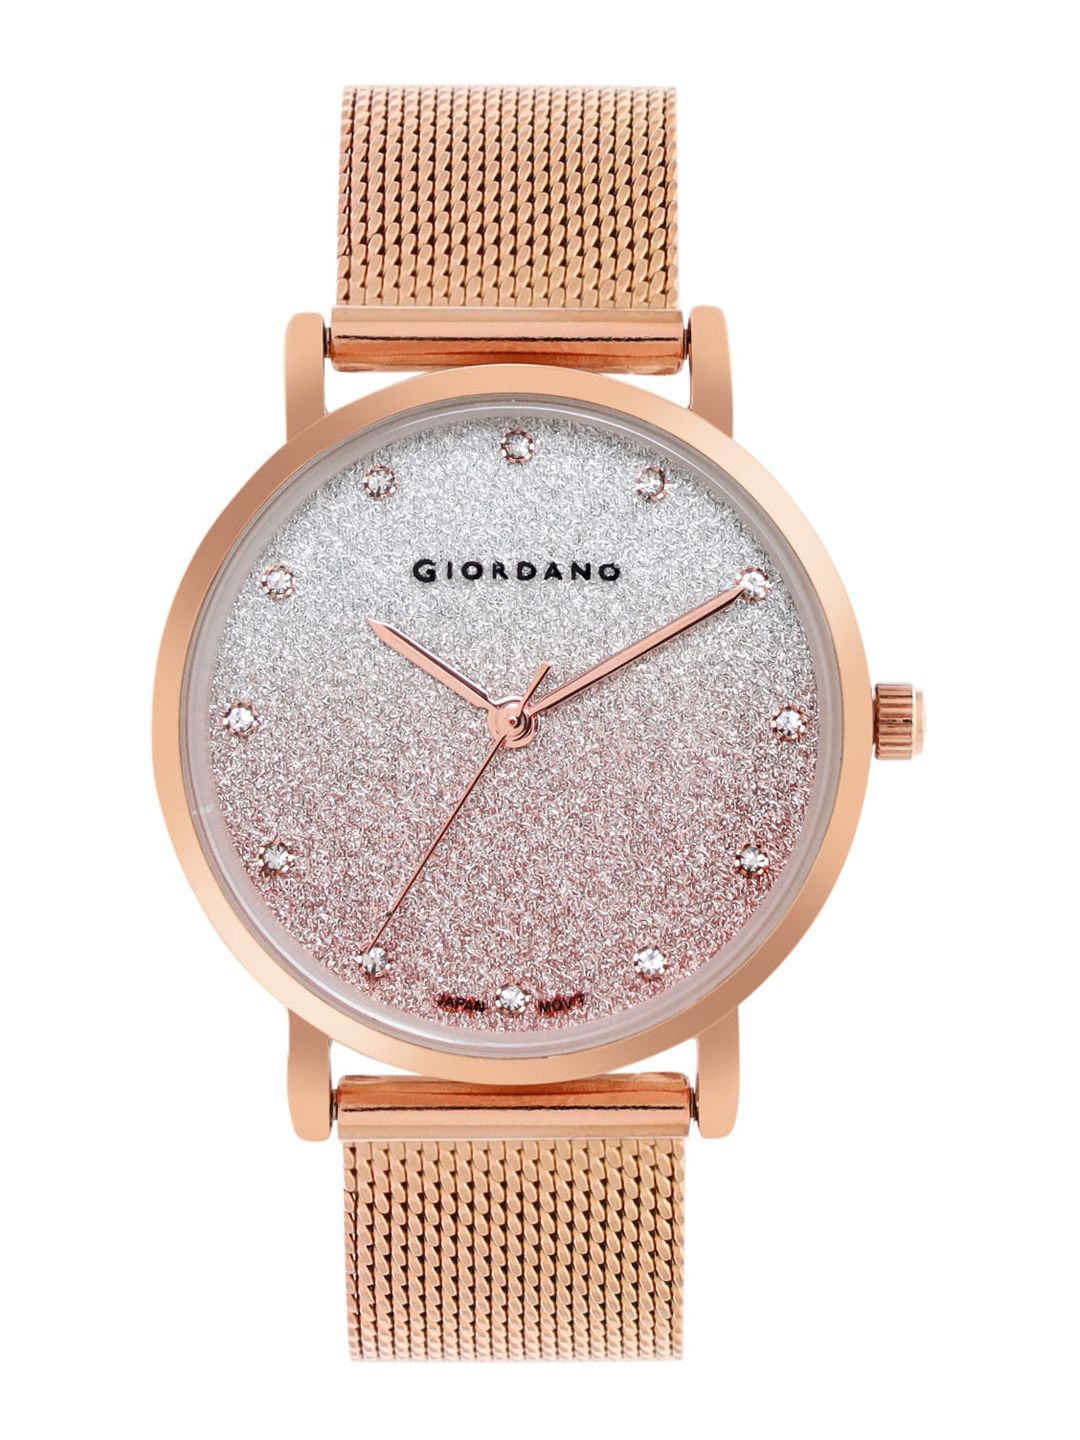 GIORDANO Women Rose Gold-Toned Embellished Dial Analogue Watch GD-60005 Price in India